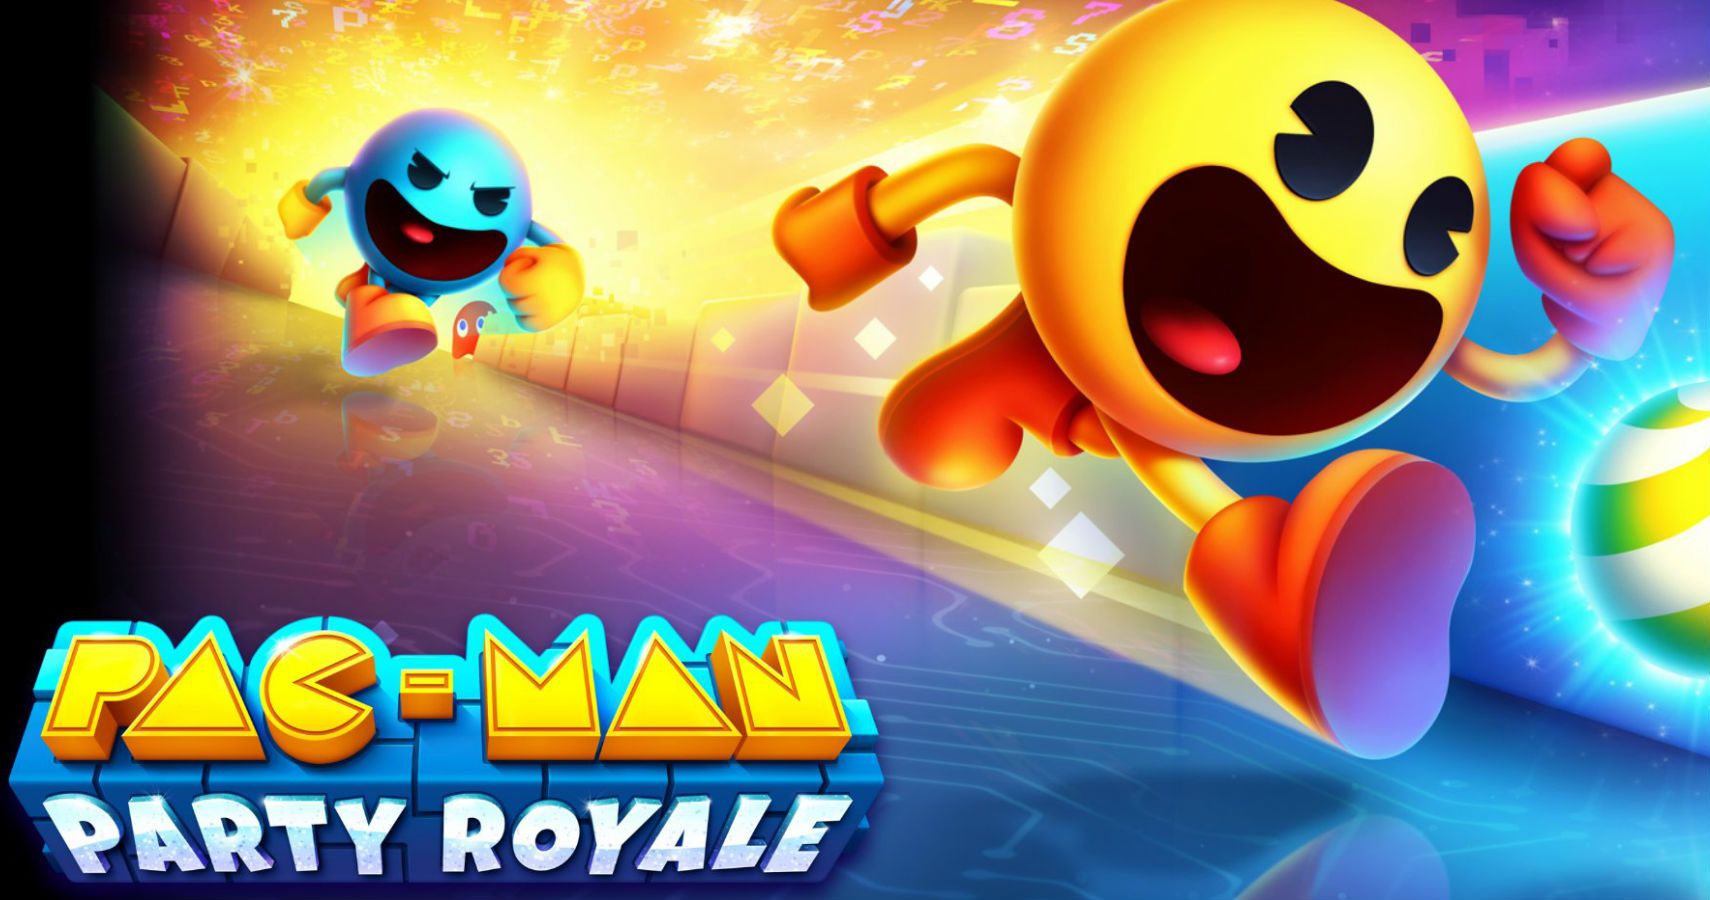 Apple Arcade Receives New Games Highlighted By PacMan Party Royale